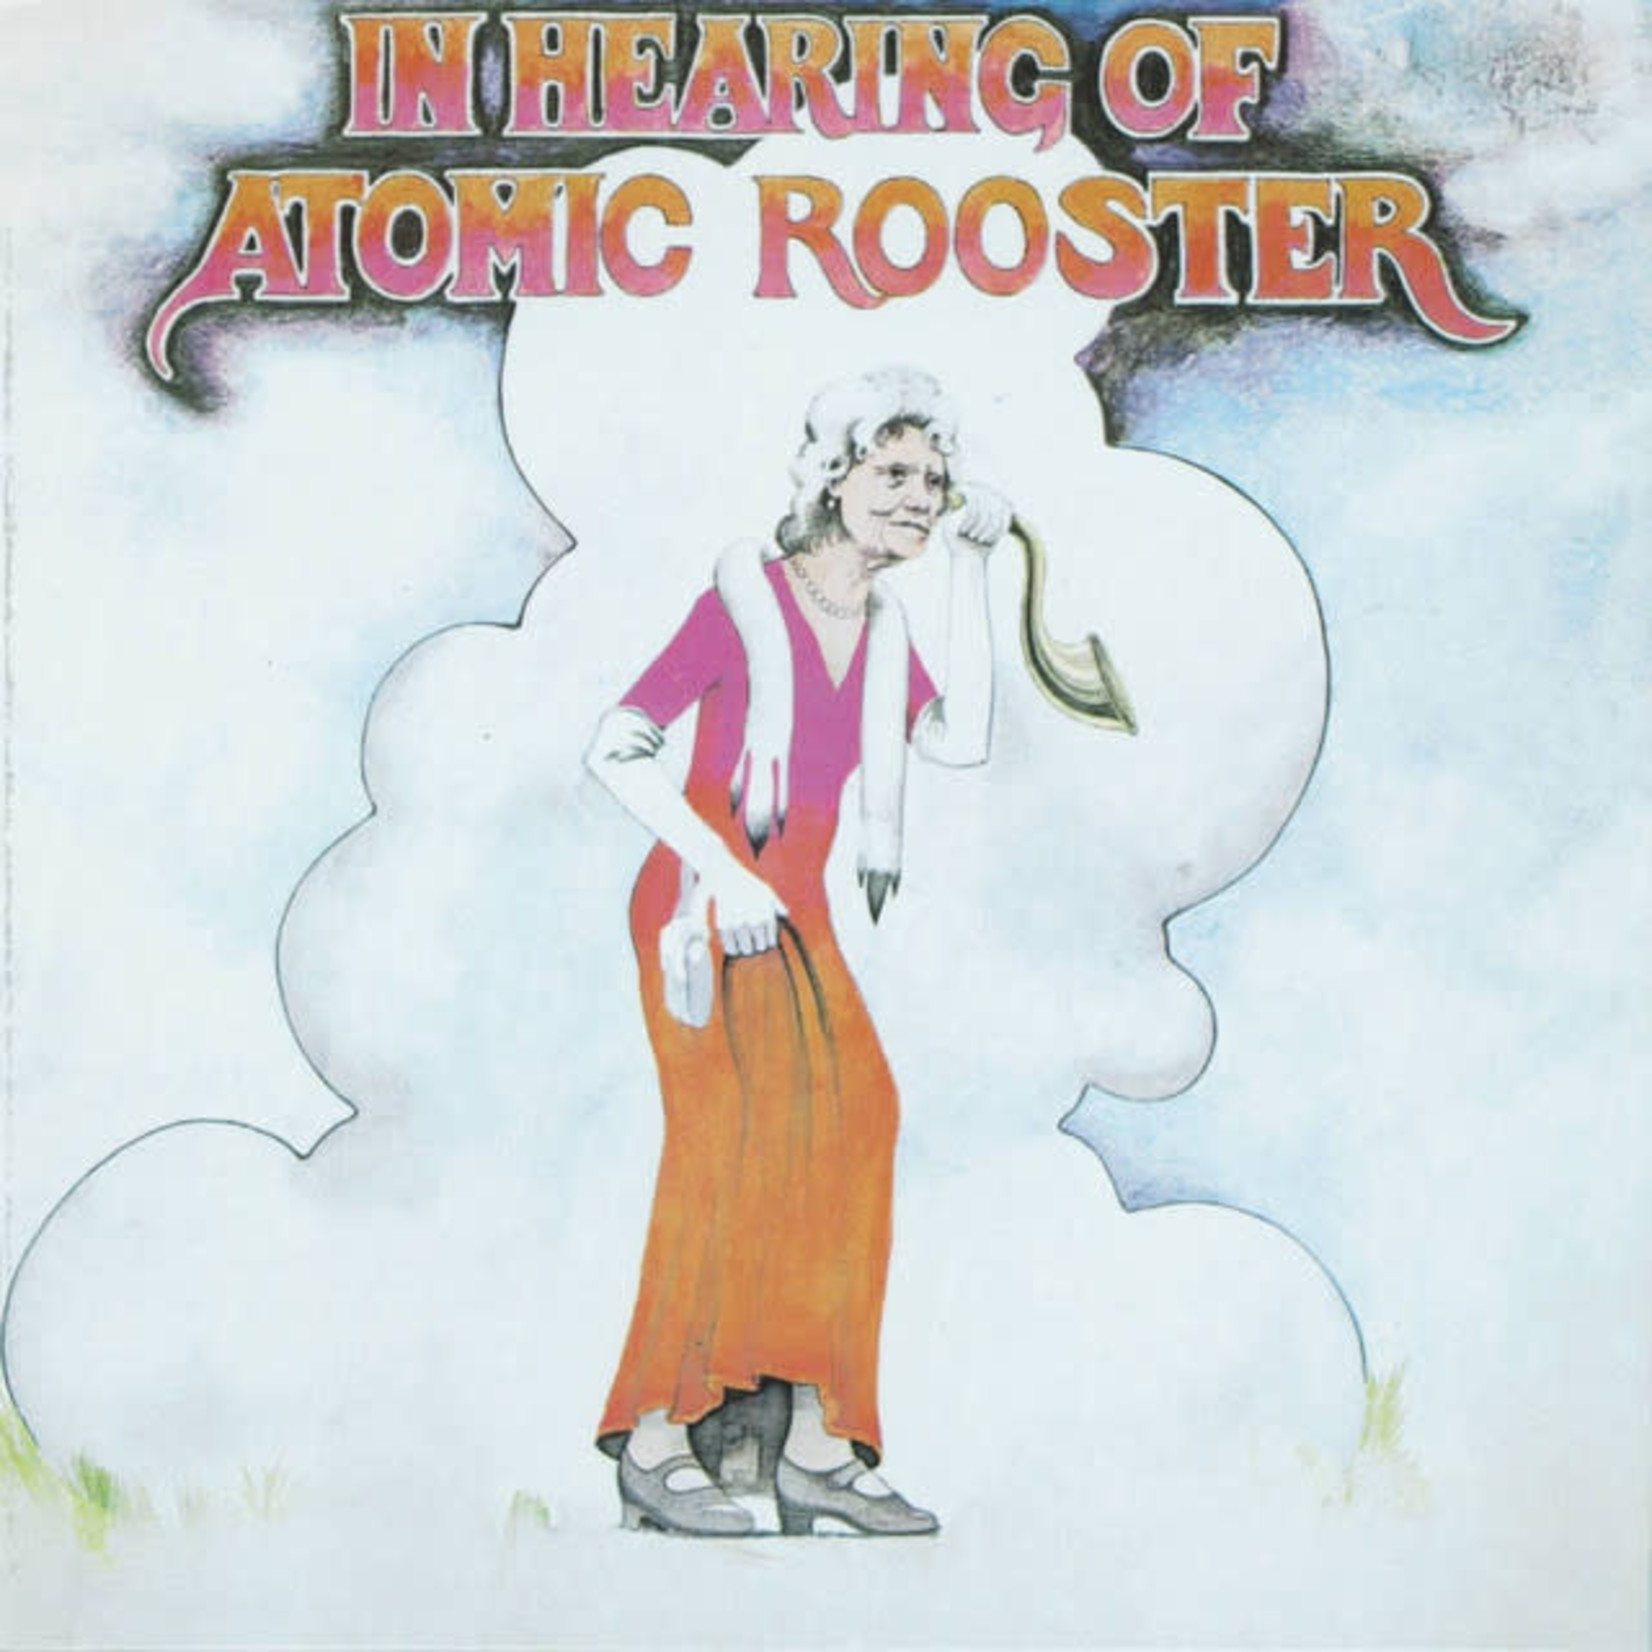 Vinyl Atomic Rooster - In Hearing Of